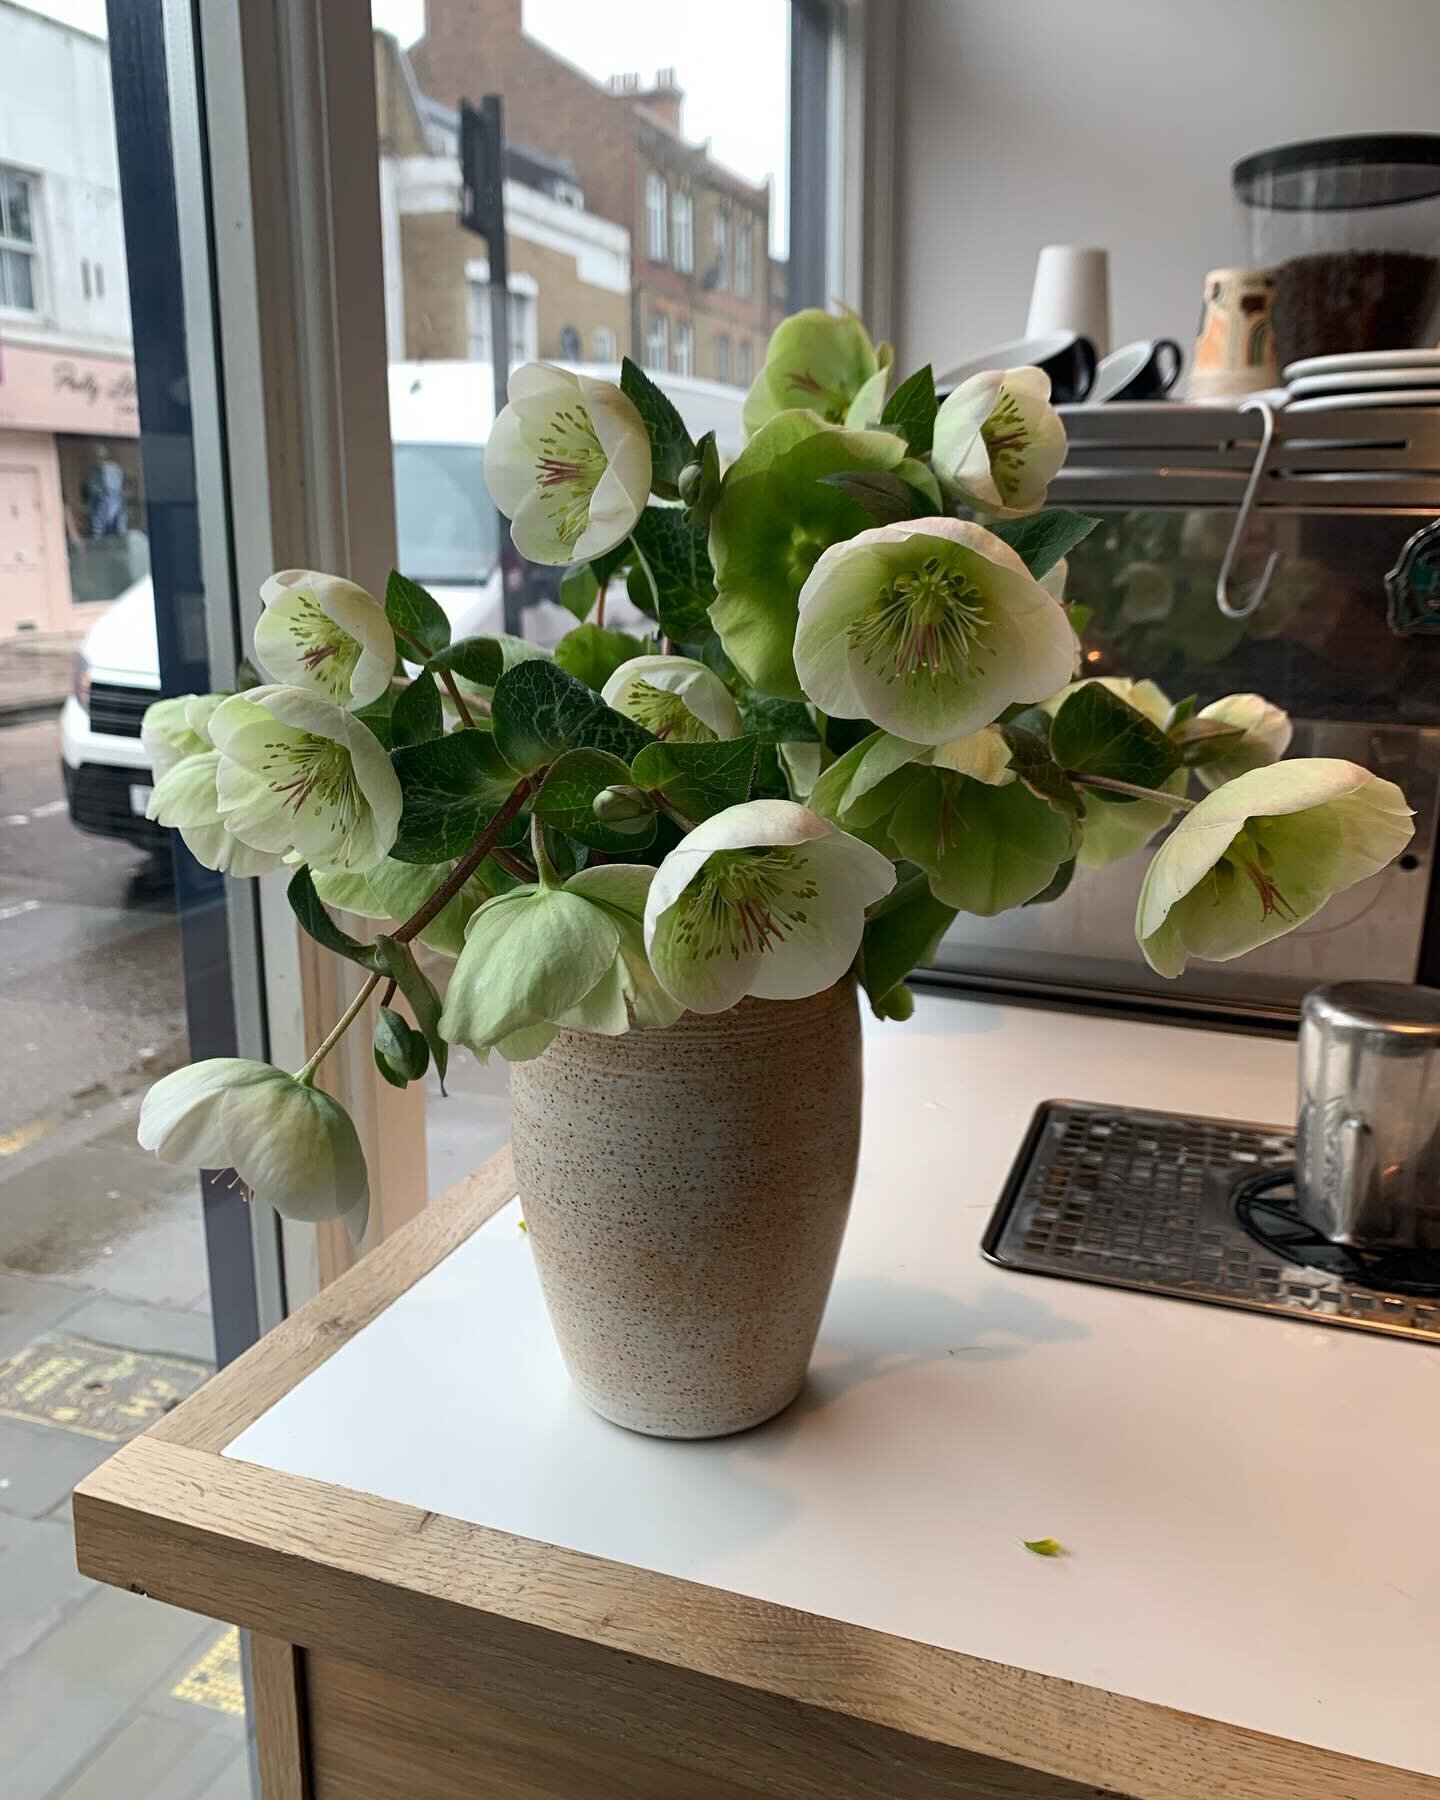 Hellebore season is in full swing and I&rsquo;m all about it. ✨ The colored &ldquo;petals&rdquo; are actually sepals, like little protective wrappers for the flowers inside.